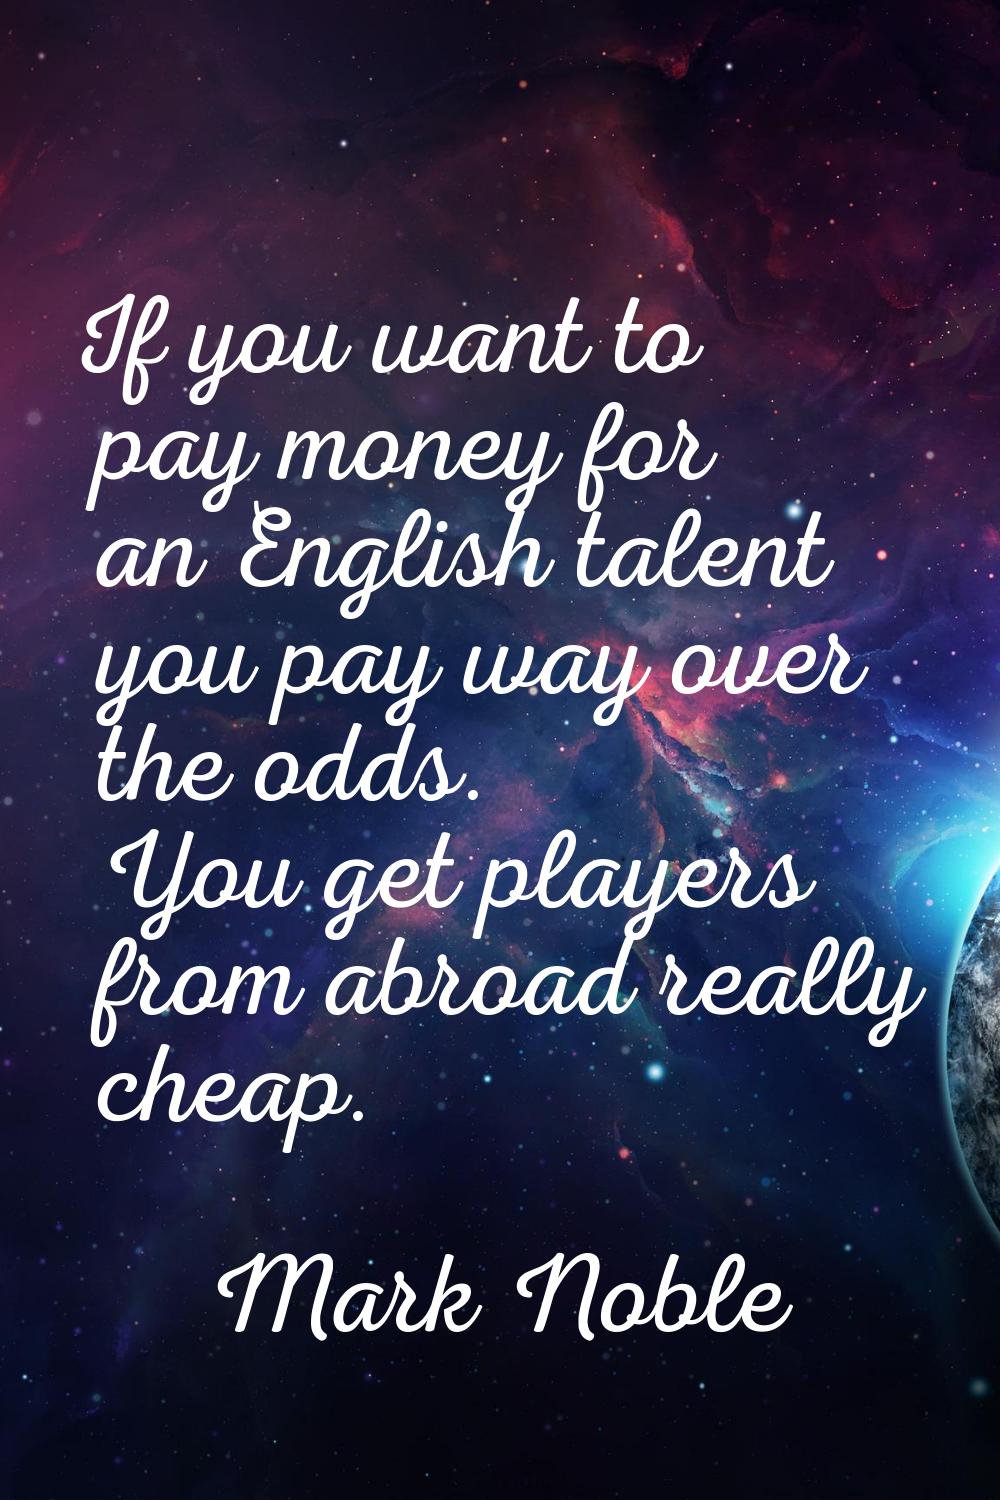 If you want to pay money for an English talent you pay way over the odds. You get players from abro